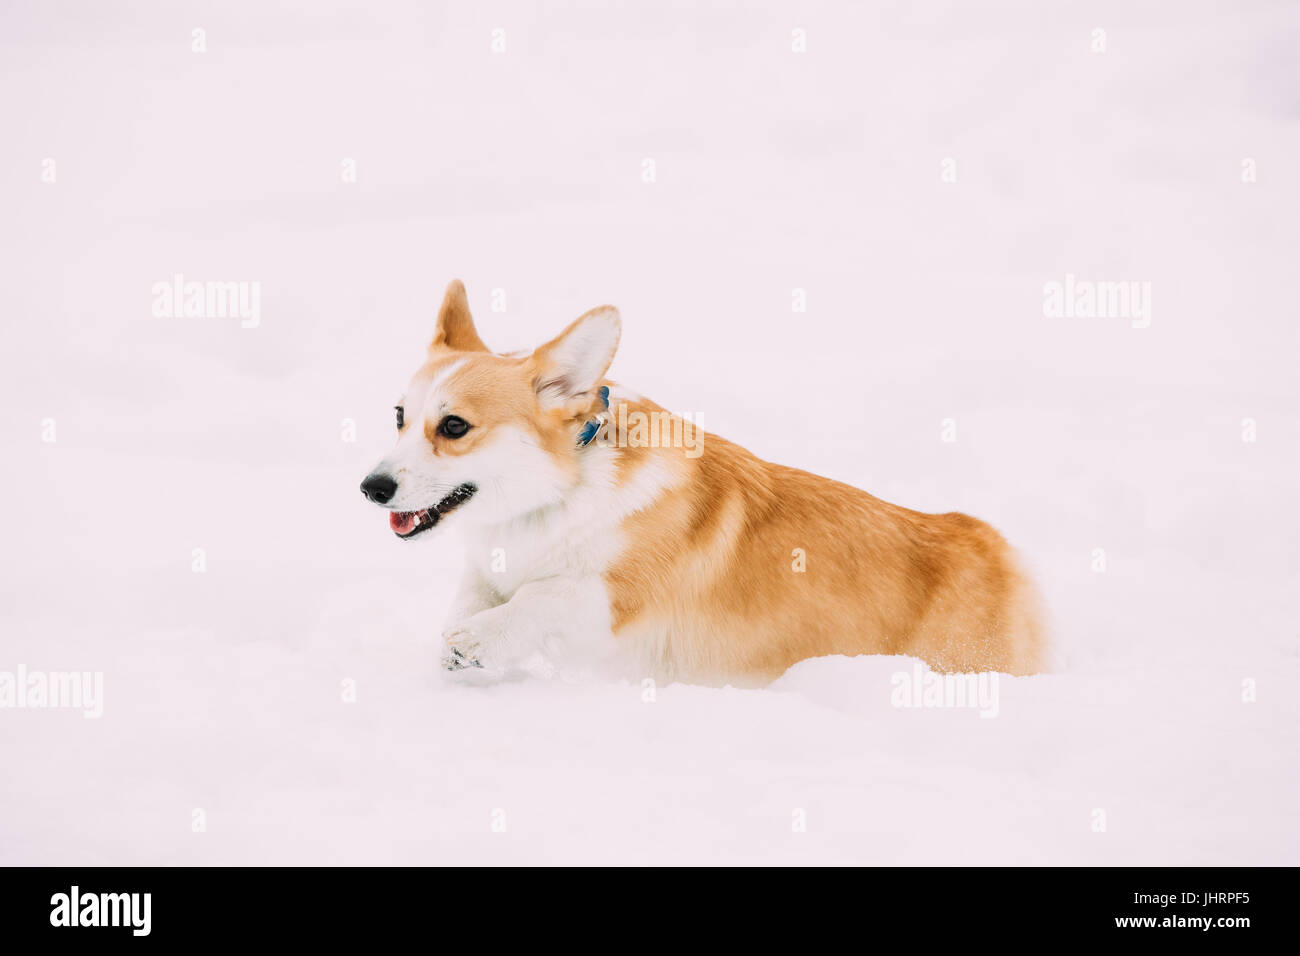 Funny Happy Pembroke Welsh Corgi Dog Playing, Fast Running Outdoor In Snow, Snowdrift At Winter Day. Welsh Corgi Is A Small Type Of Herding Dog That O Stock Photo